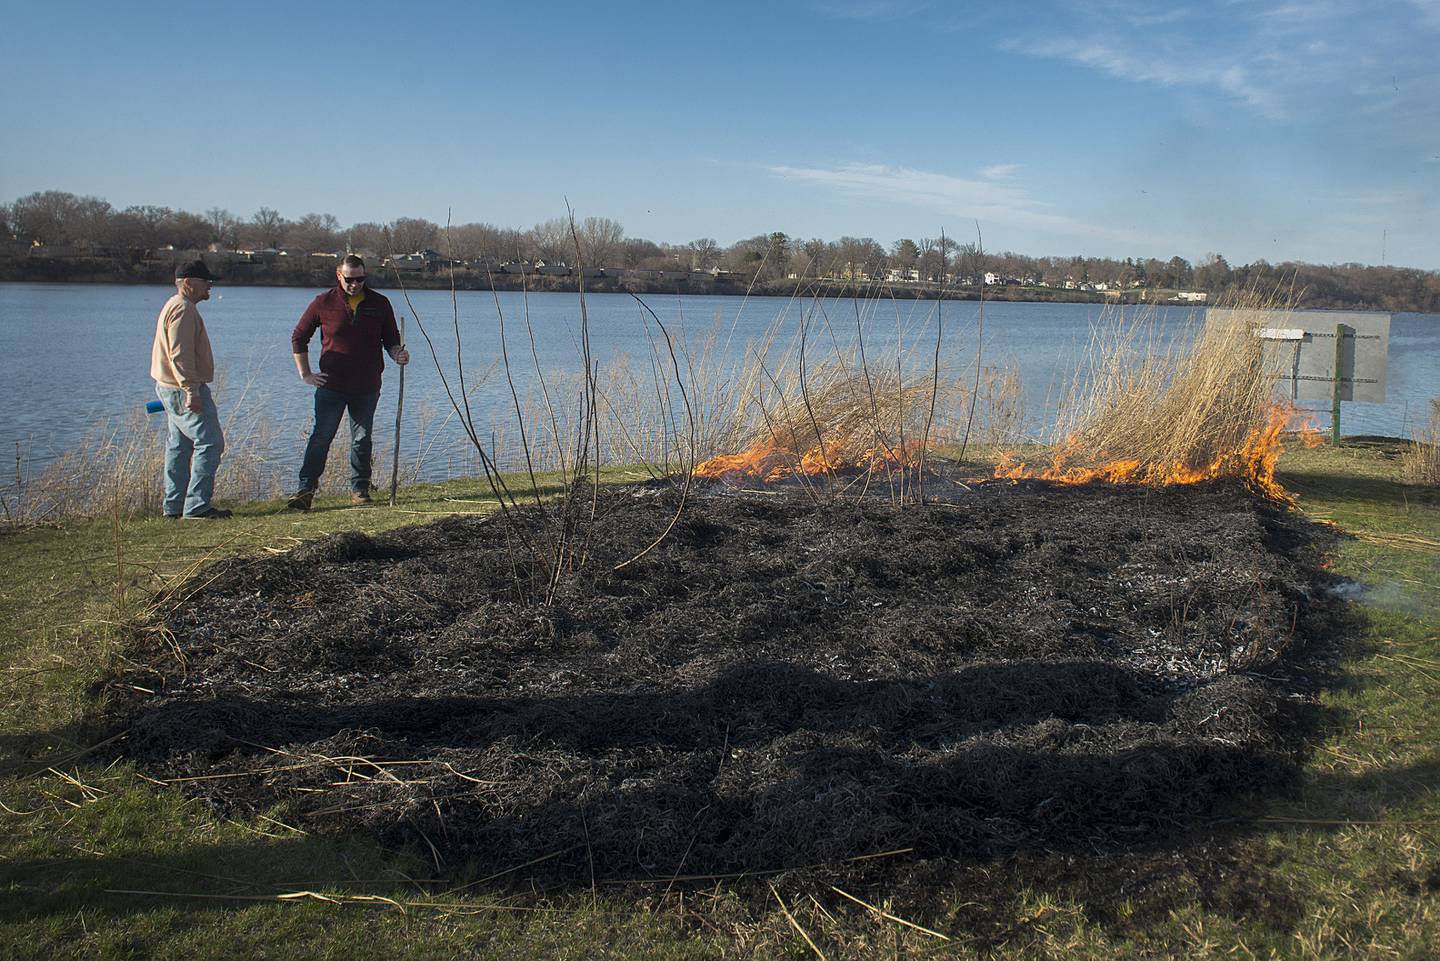 To celebrate Keller and his work, Rick O'Neil (left) and Kyle Sommers oversaw a small prairie burn in the Rock Falls natural grass area.  The area is located right where the canal and Rock River meet.